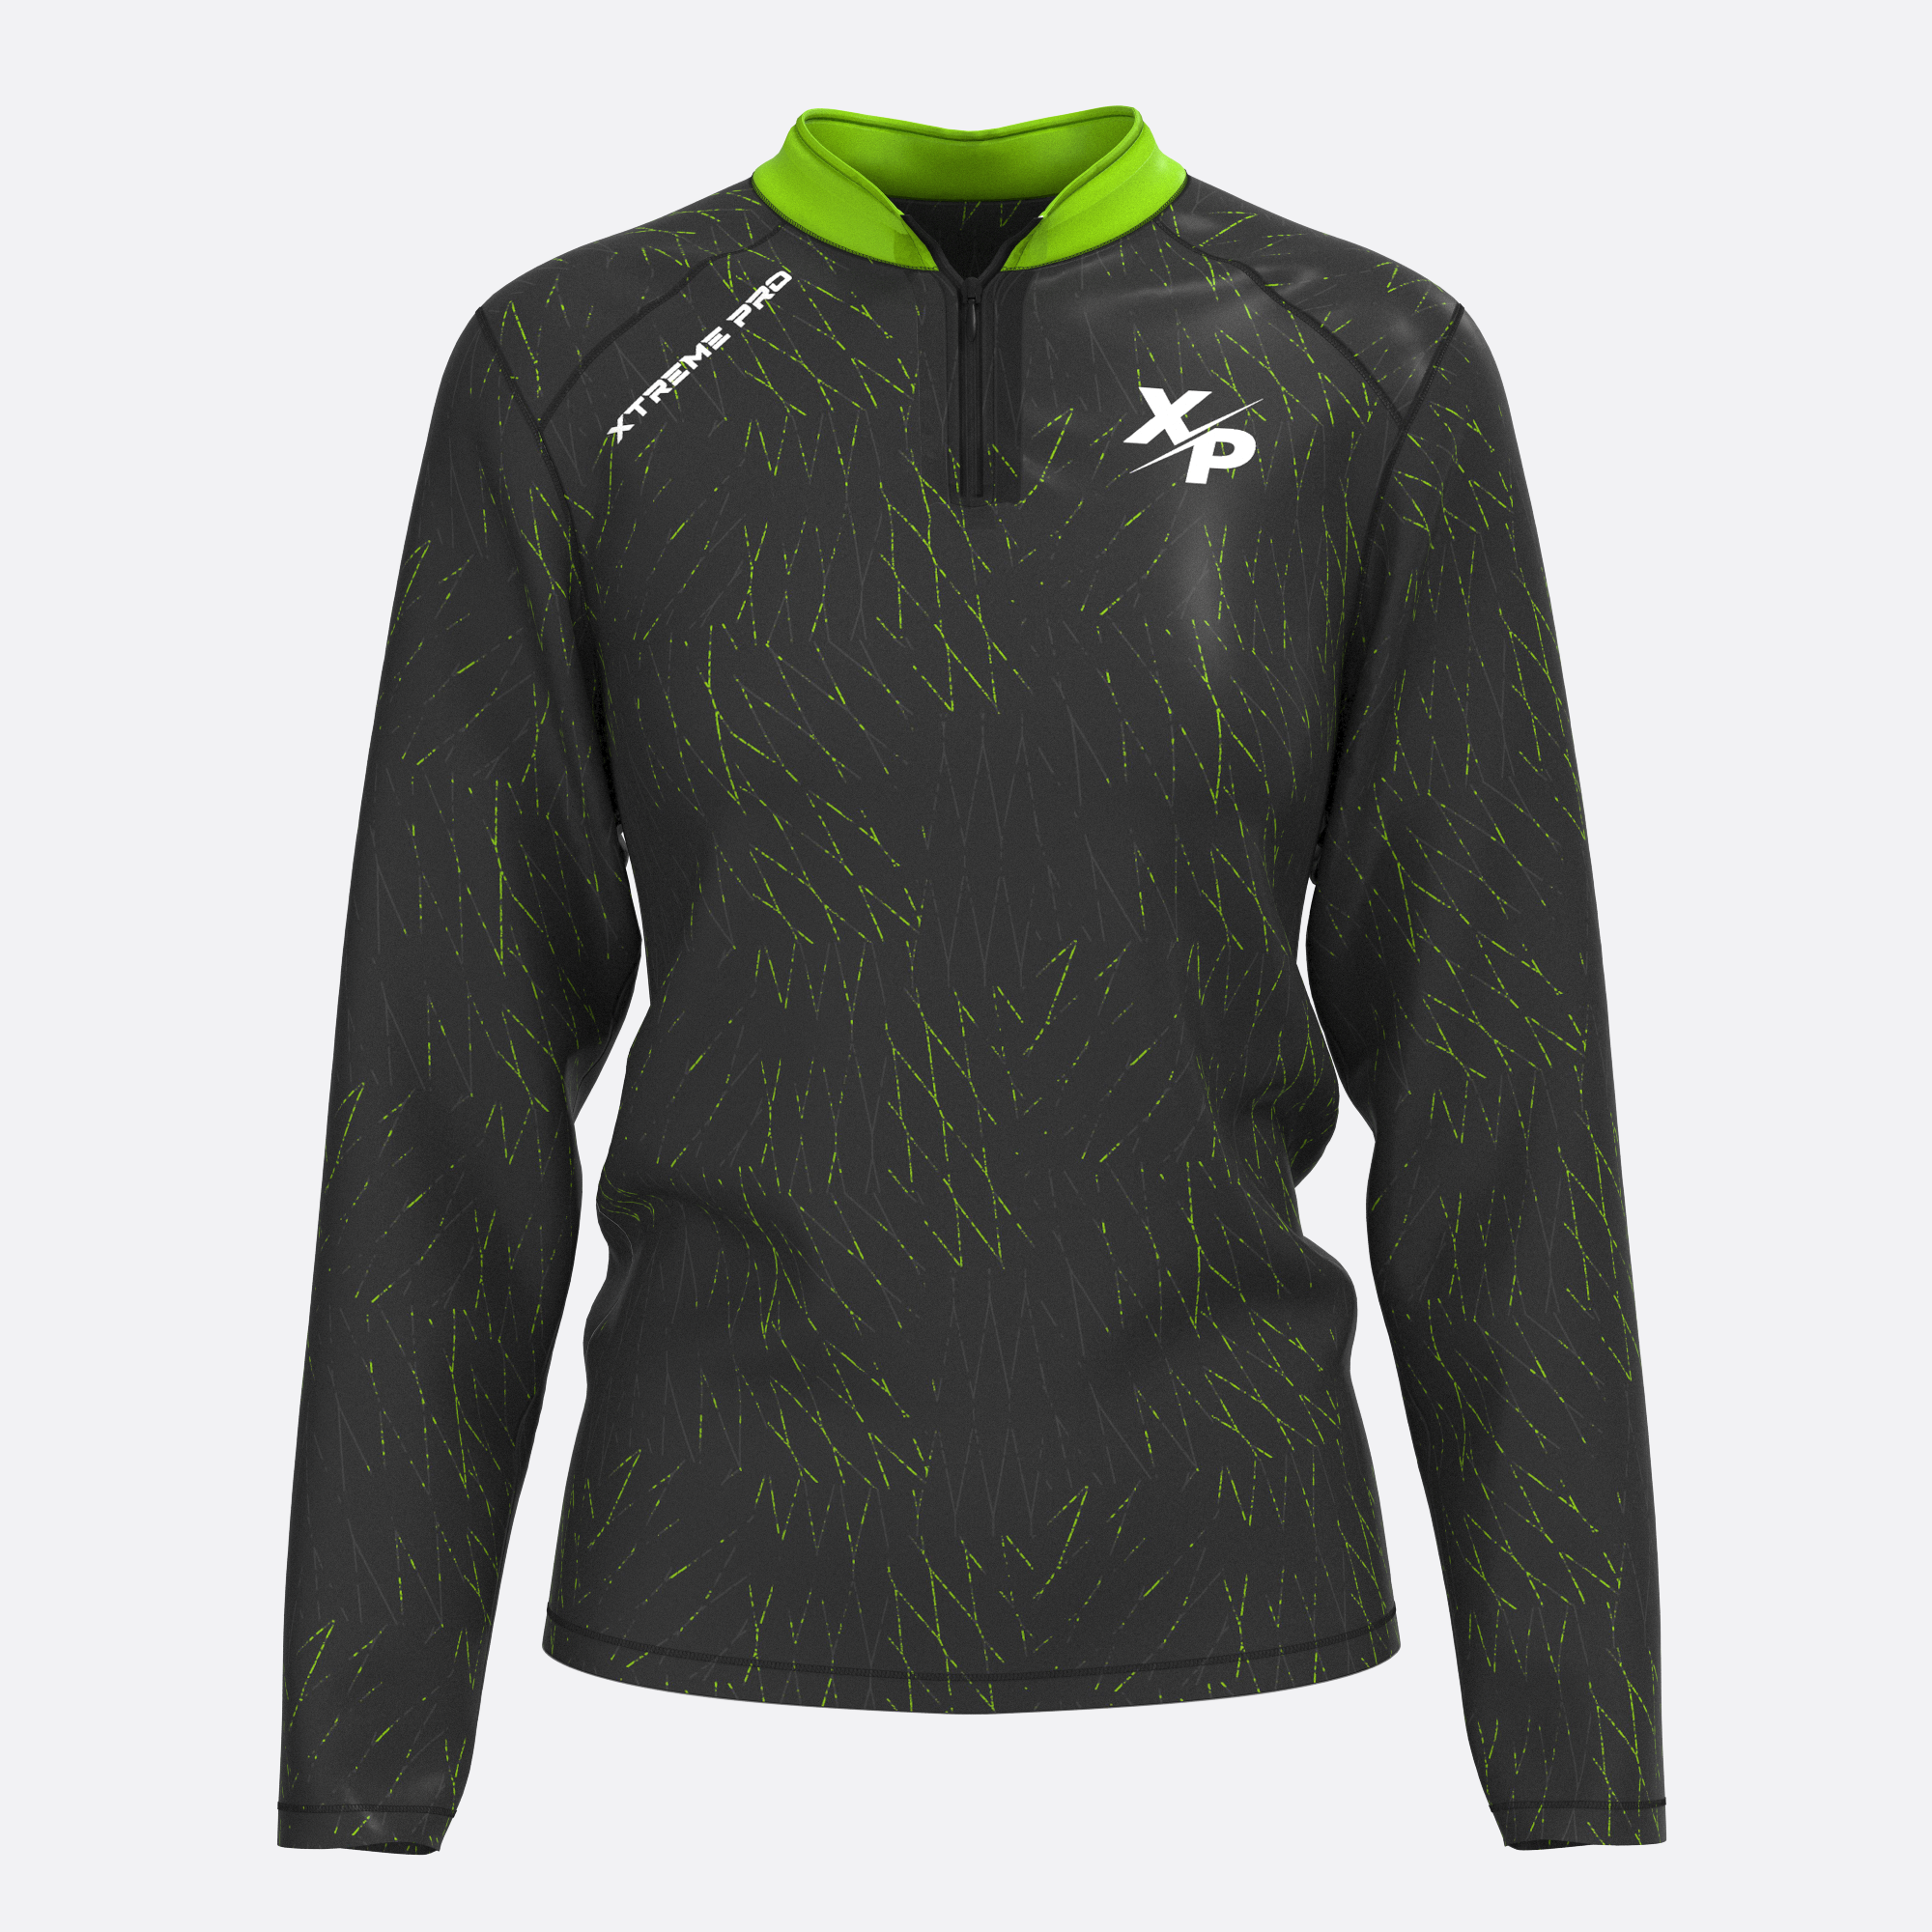 Caged Quarter Zip Jacket in Green Xtreme Pro Apparel